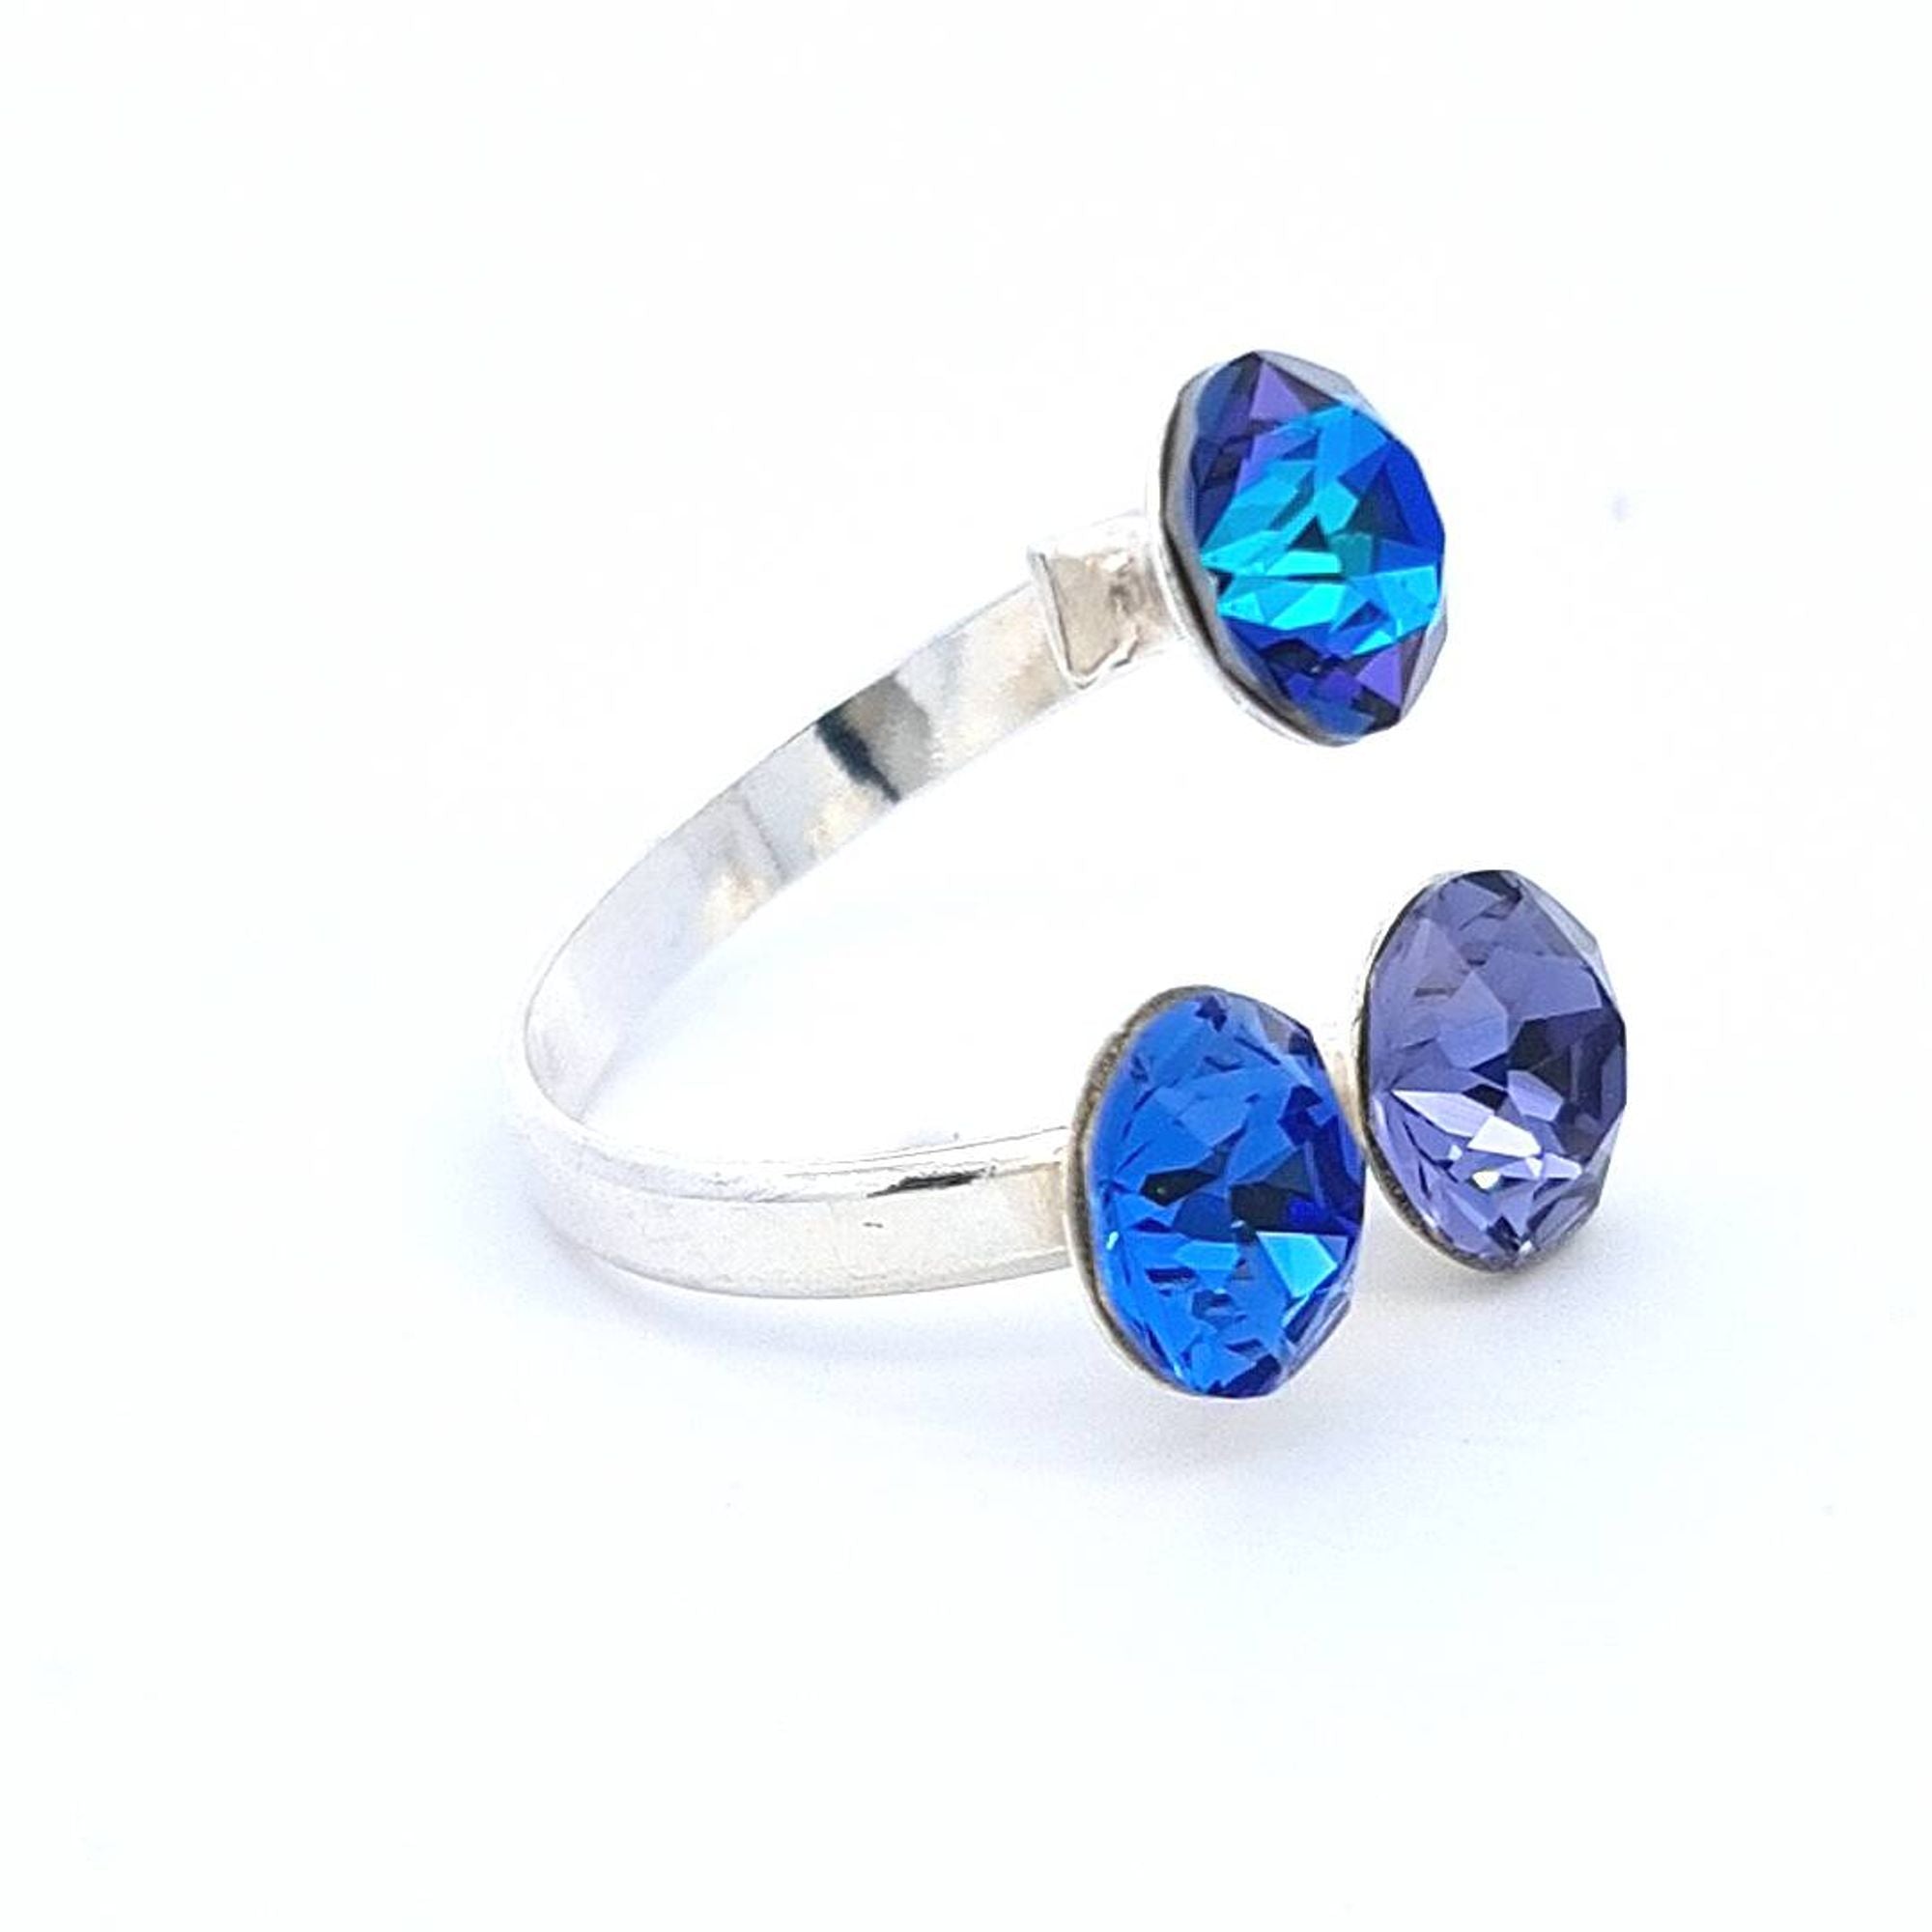 Triad Treasure Cluster Ring in Sterling Silver with Dazzling Blue-Purple Crystals by Magpie Gems, side view